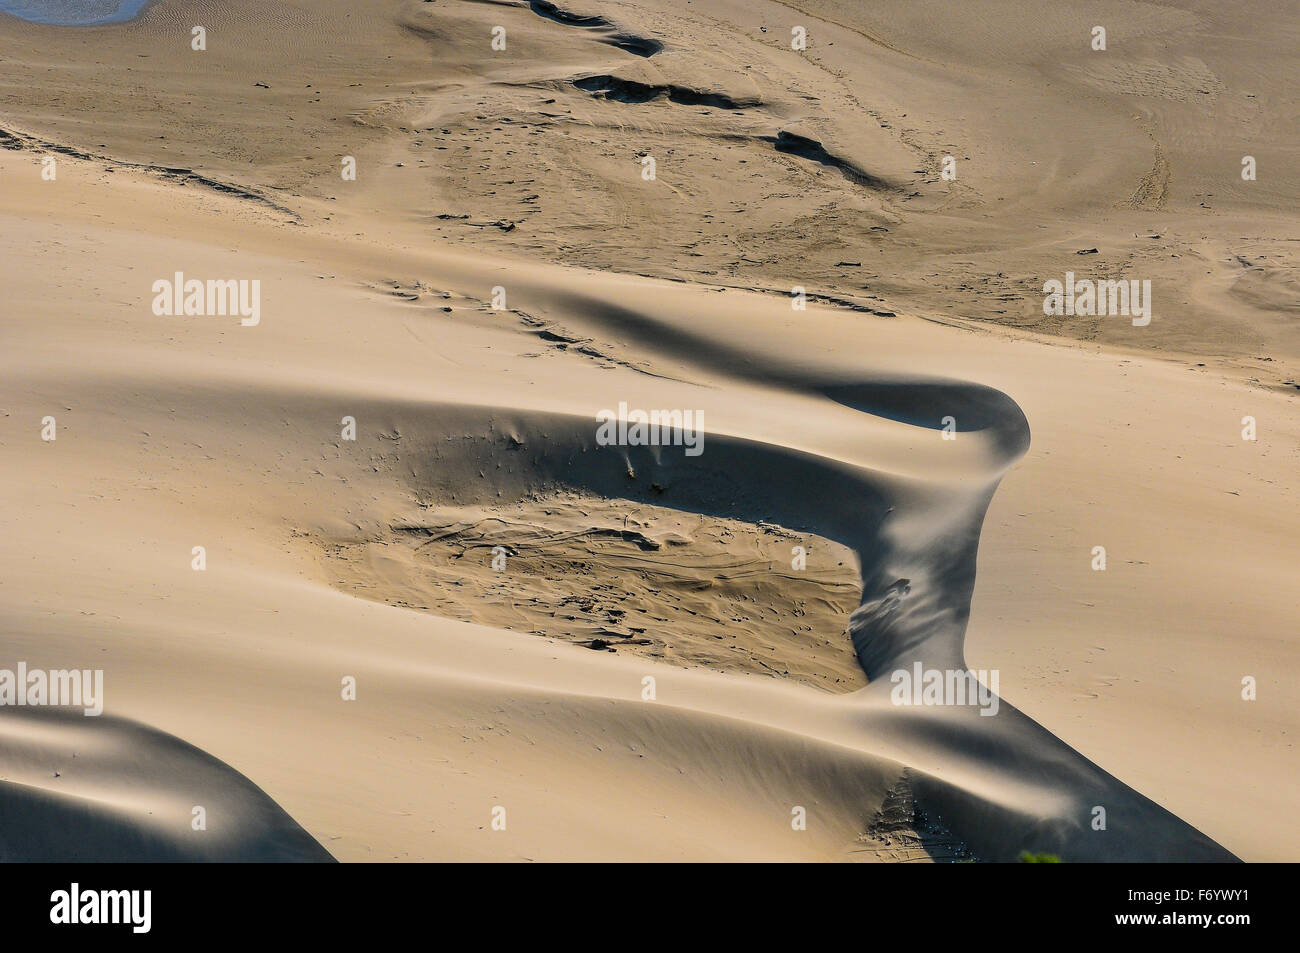 Wave structures in the dunes created by the sea Stock Photo